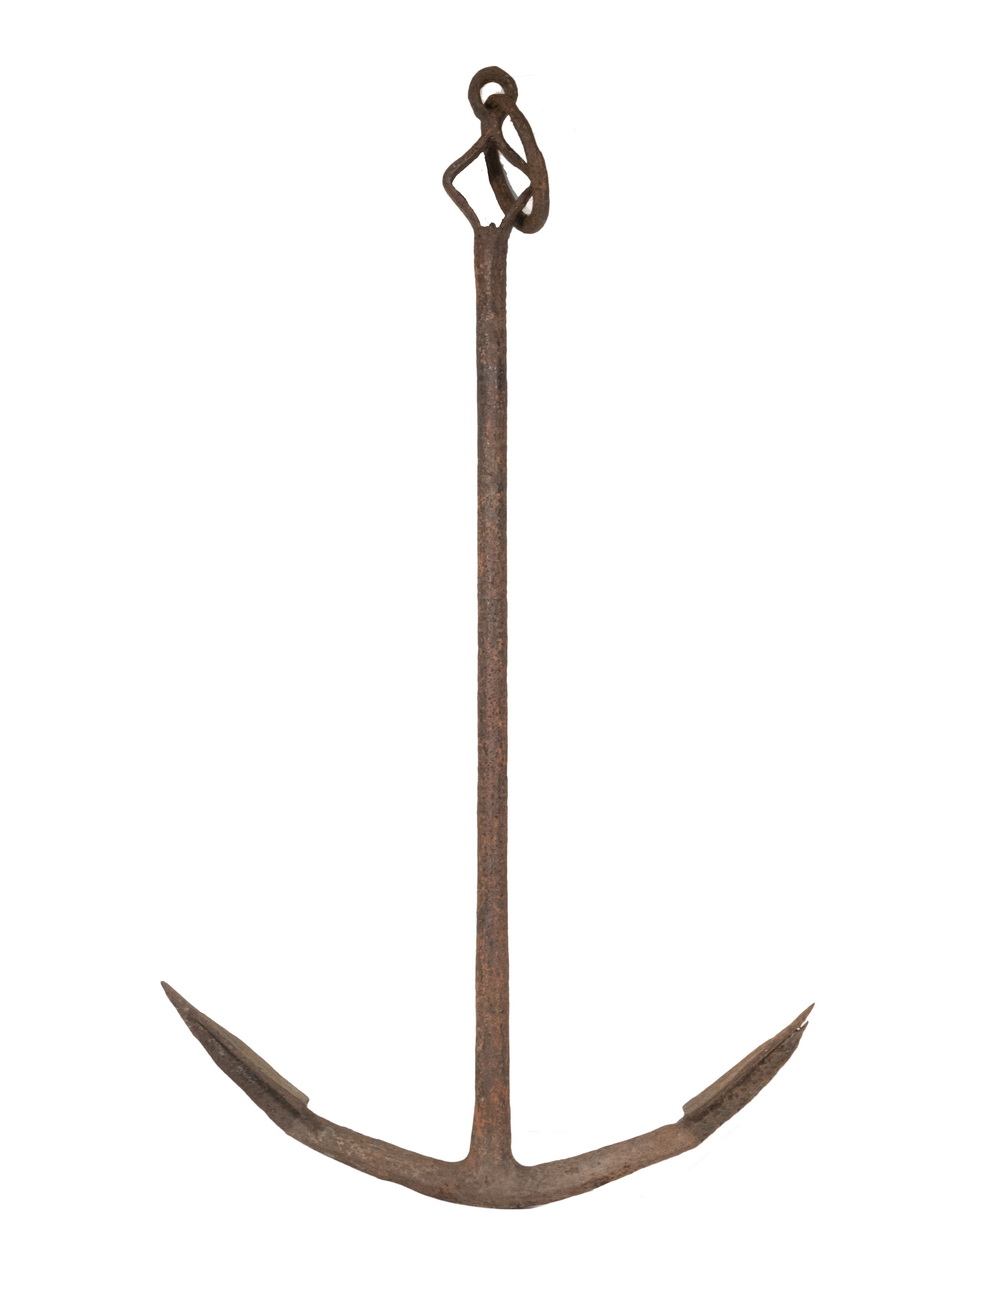 EARLY SHIP ANCHOR 18th or 19th